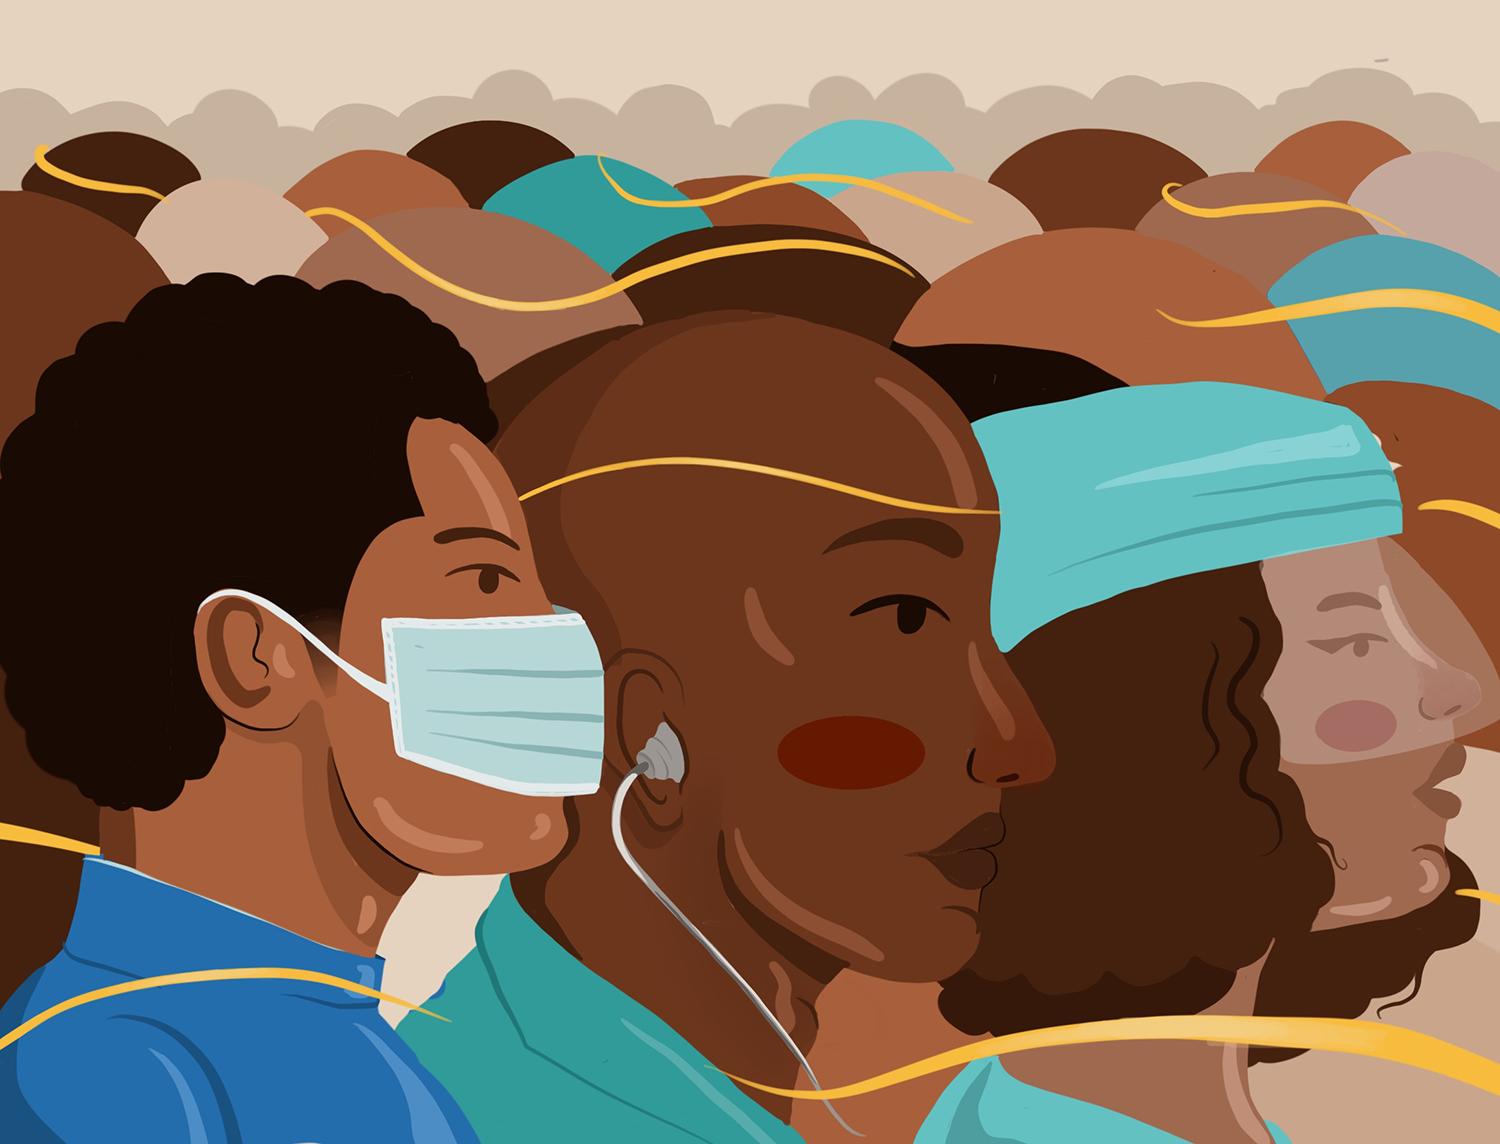 Illustration of three healthcare workers